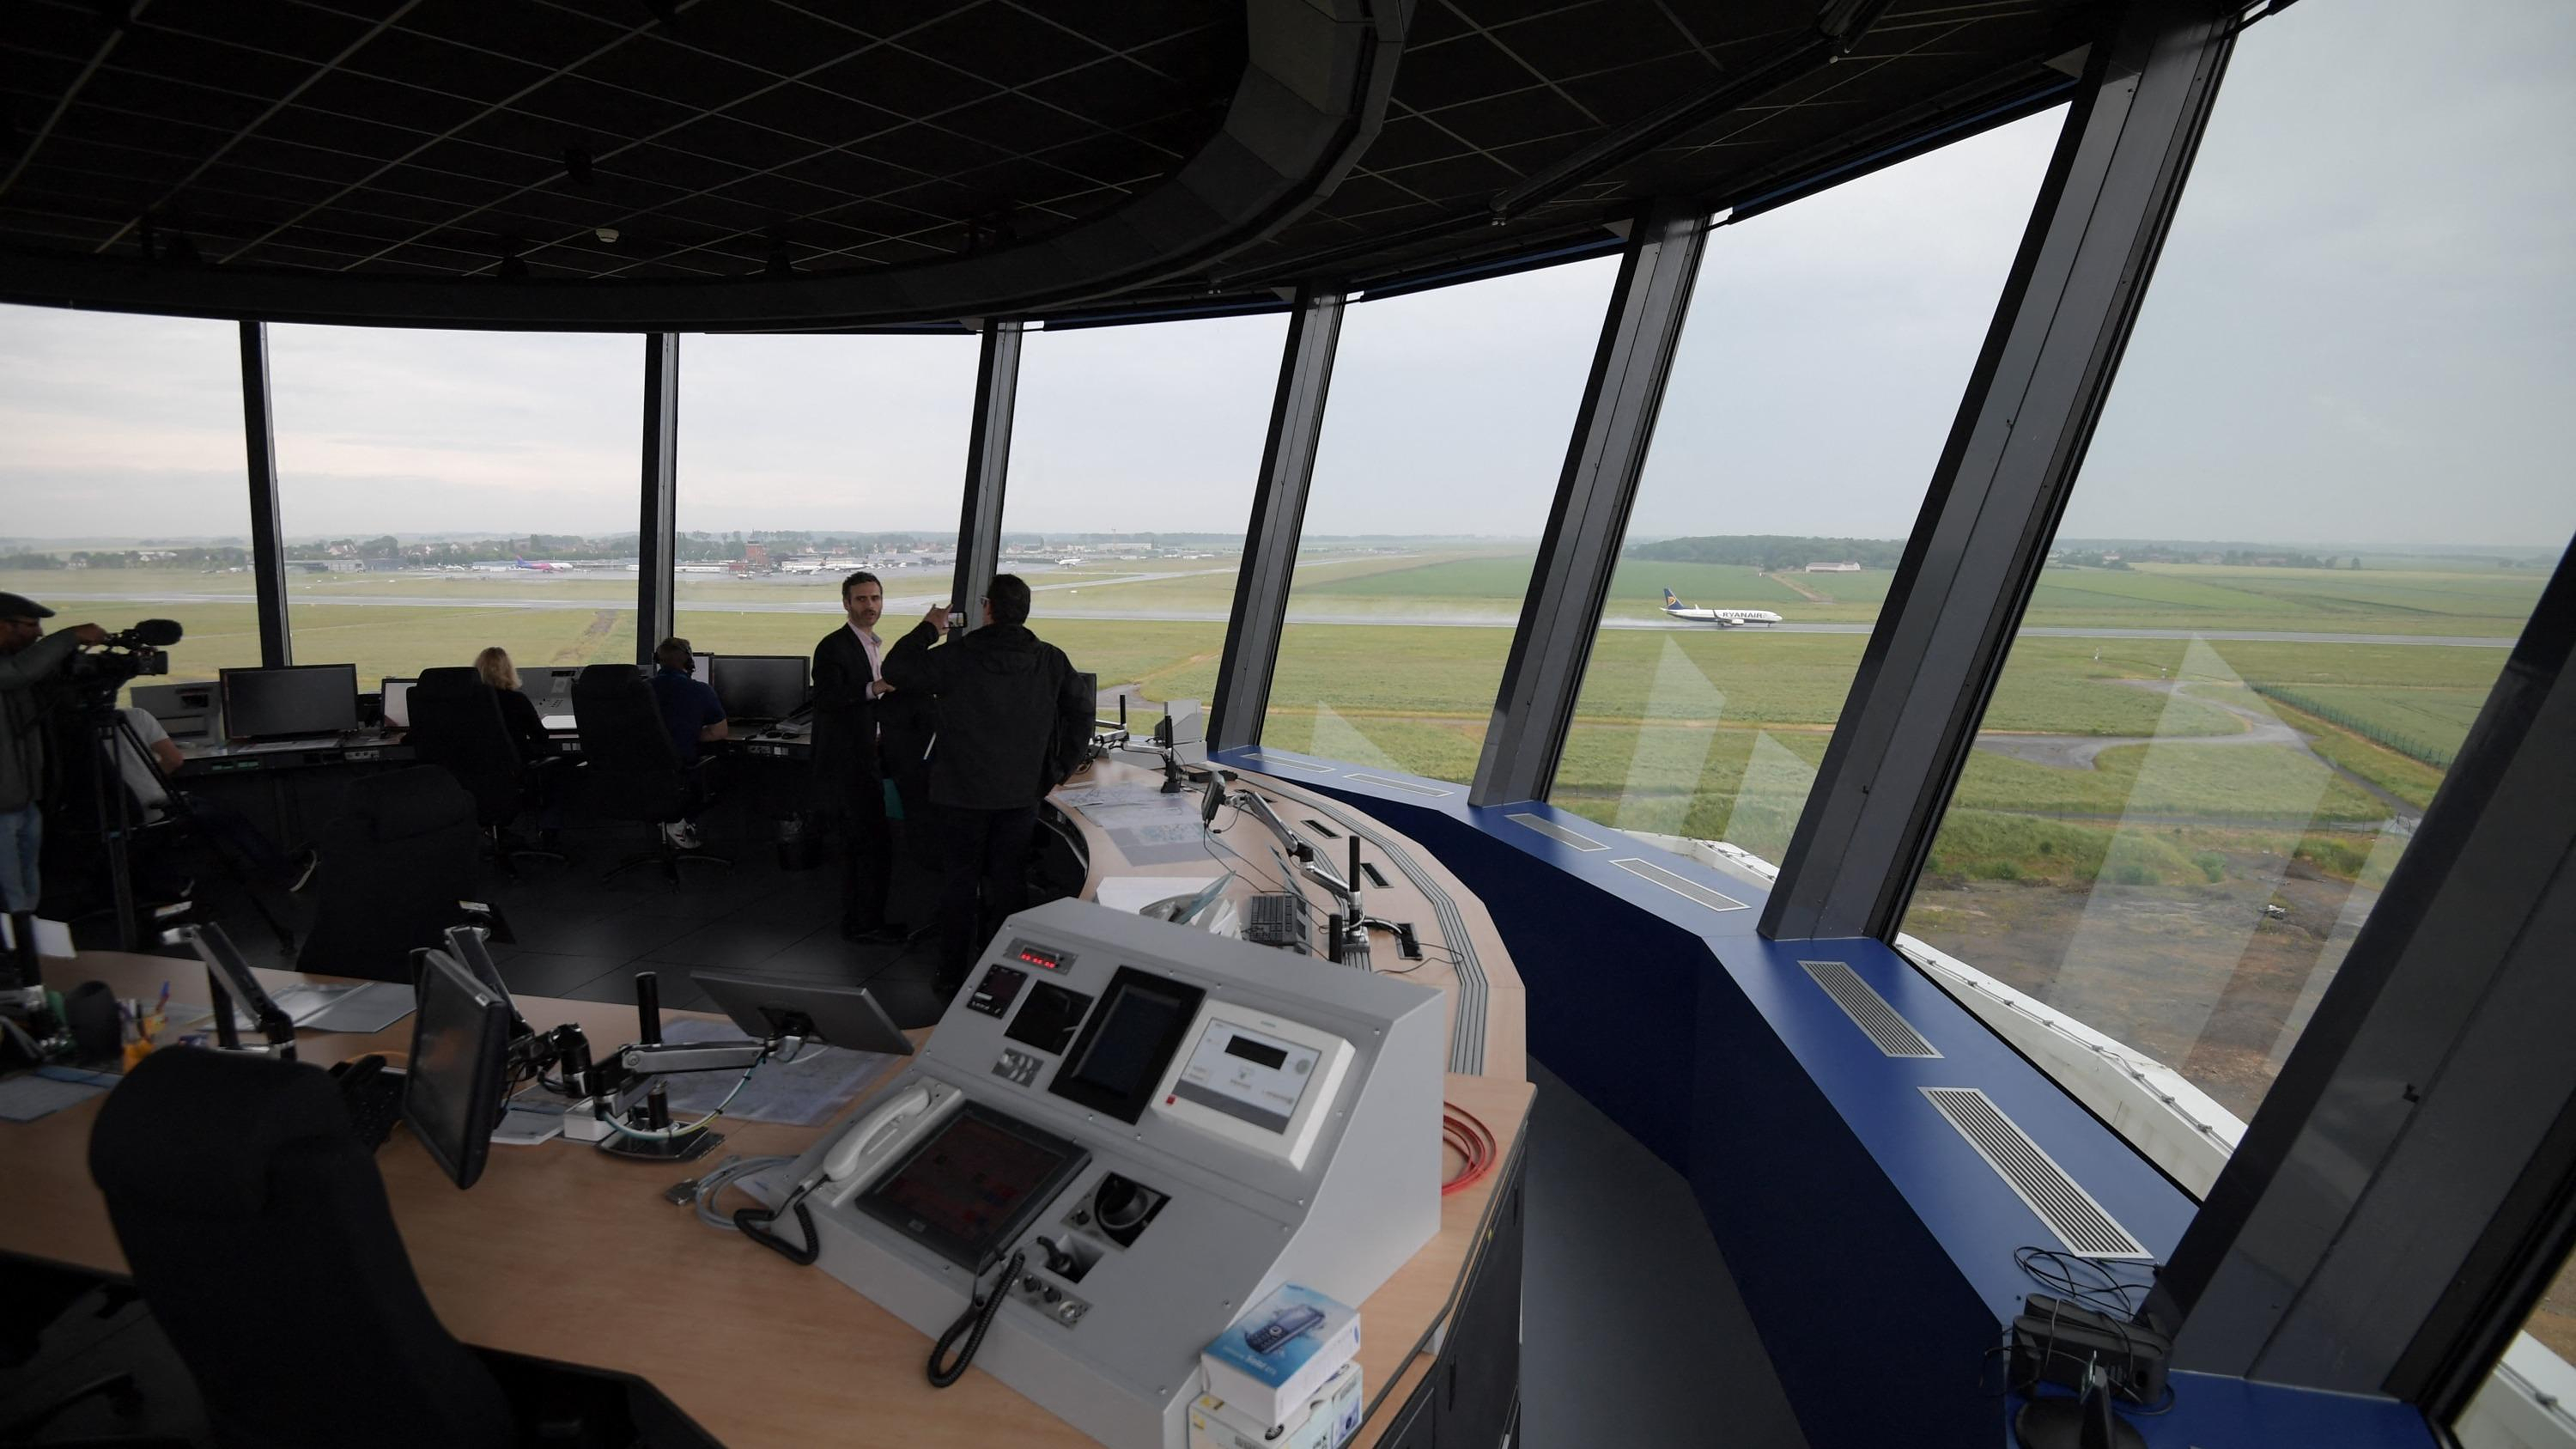 Air traffic controllers’ strike: why did the recent law on “minimum adapted service” not help avoid the walkout?